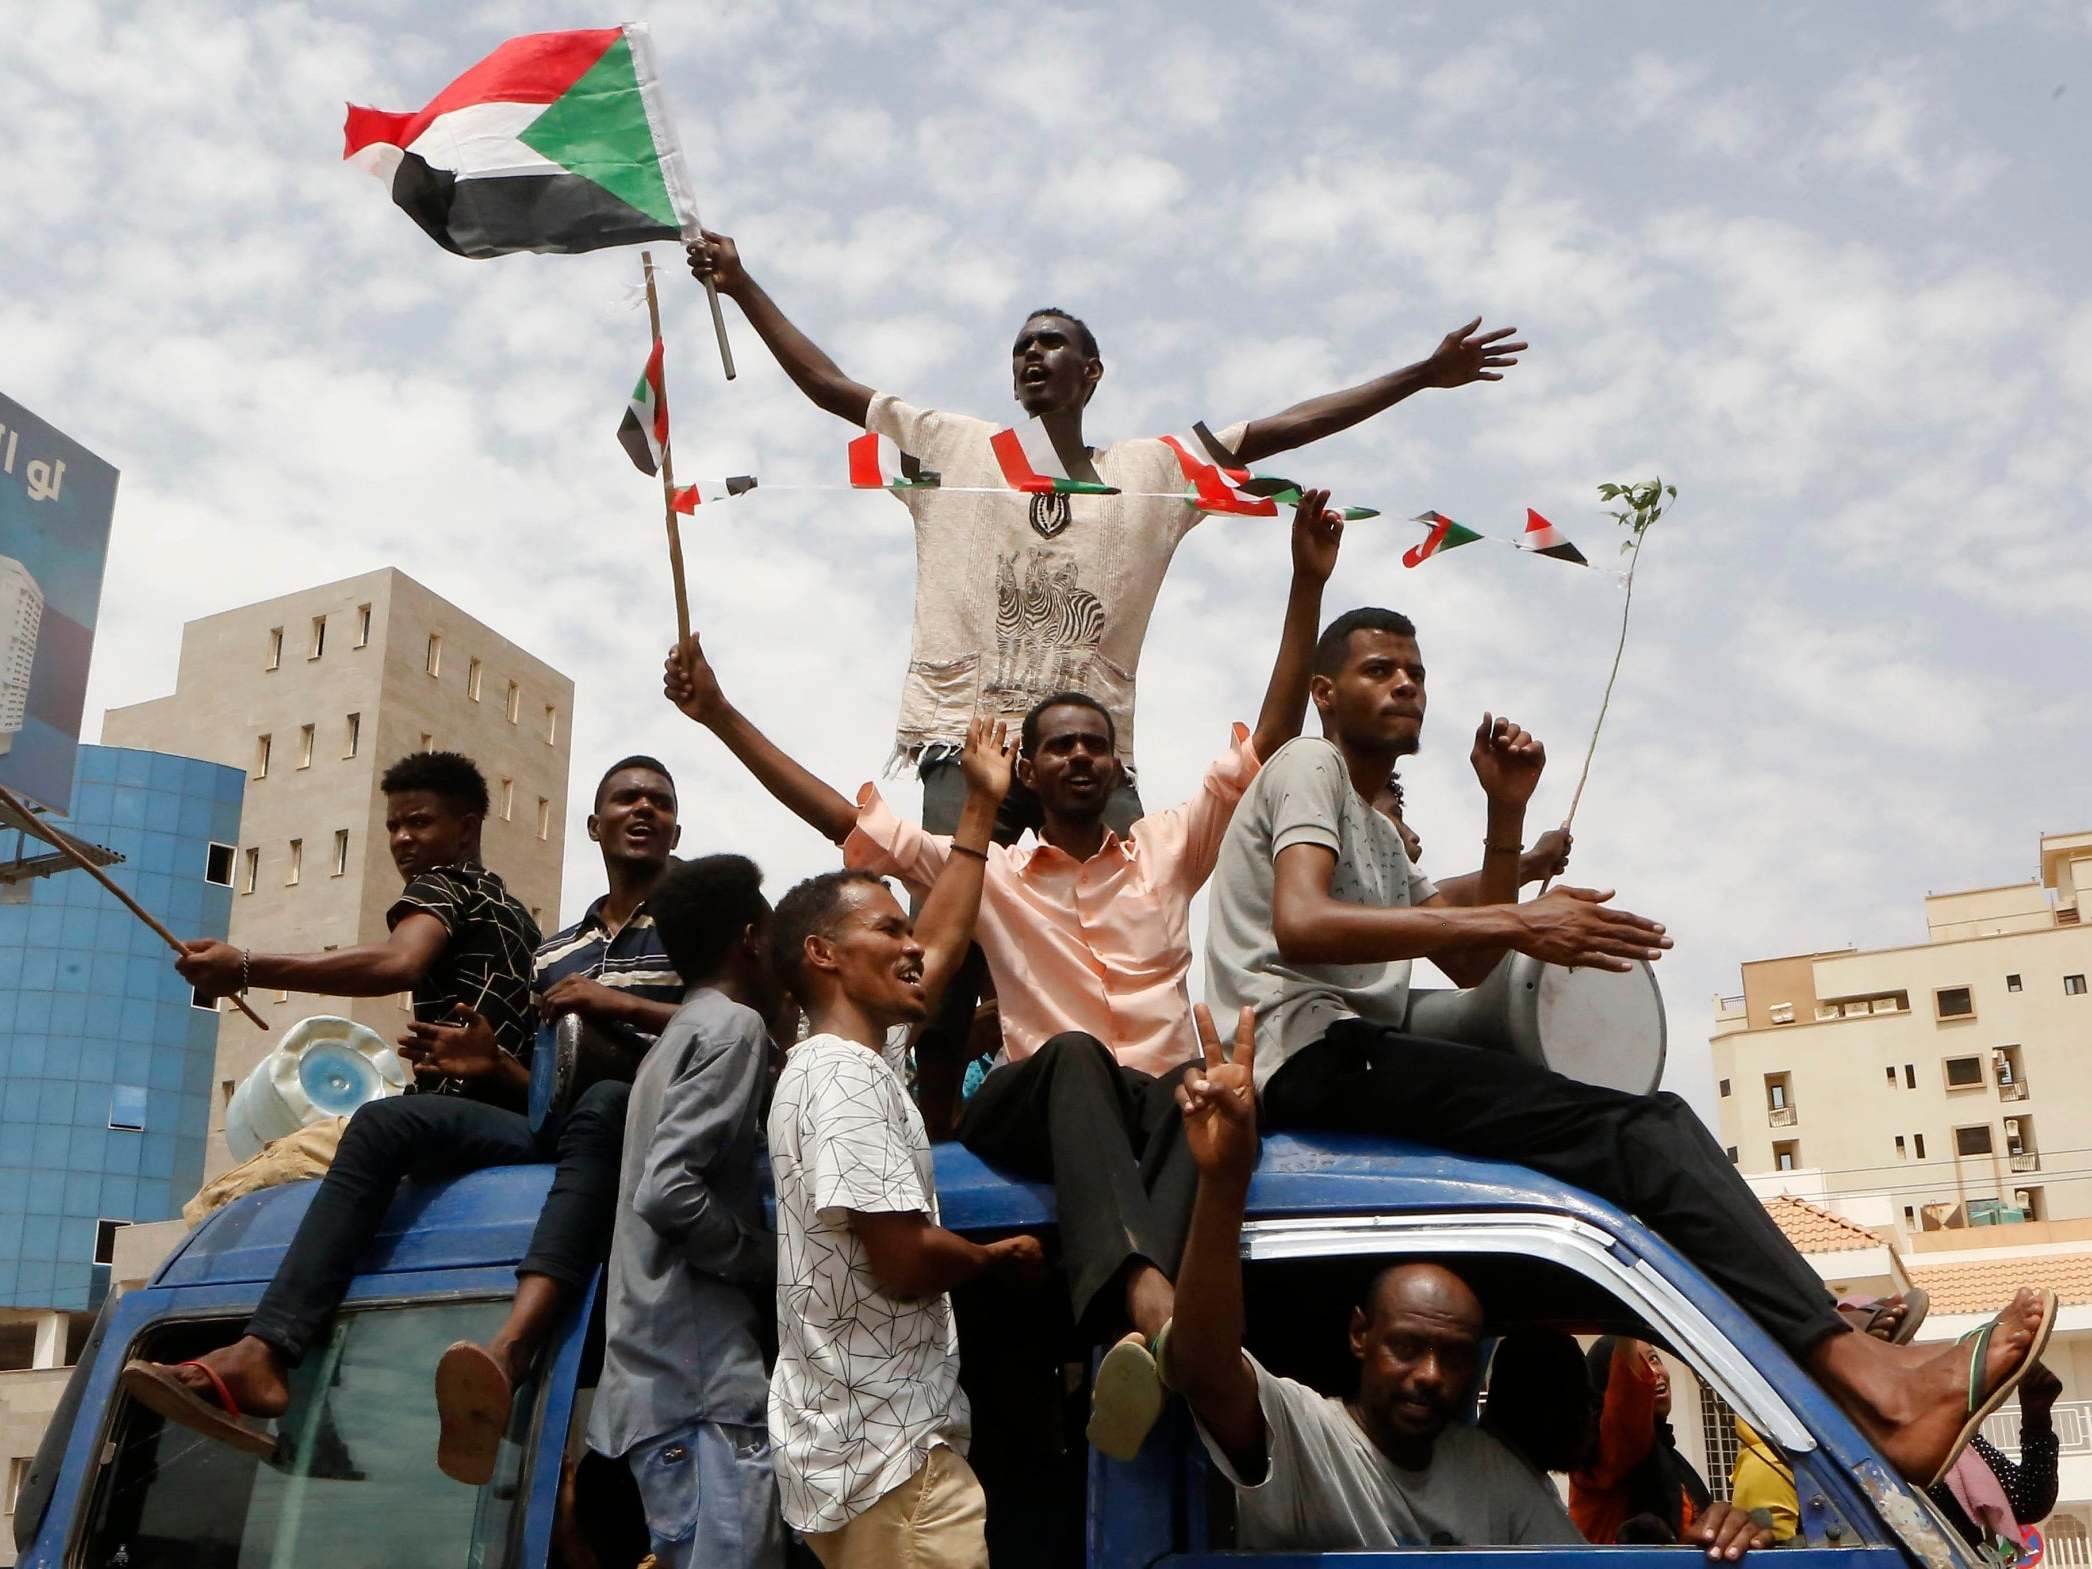 Word of the deal between Sudan’s opposition and ruling military junta sparked celebrations in the capital